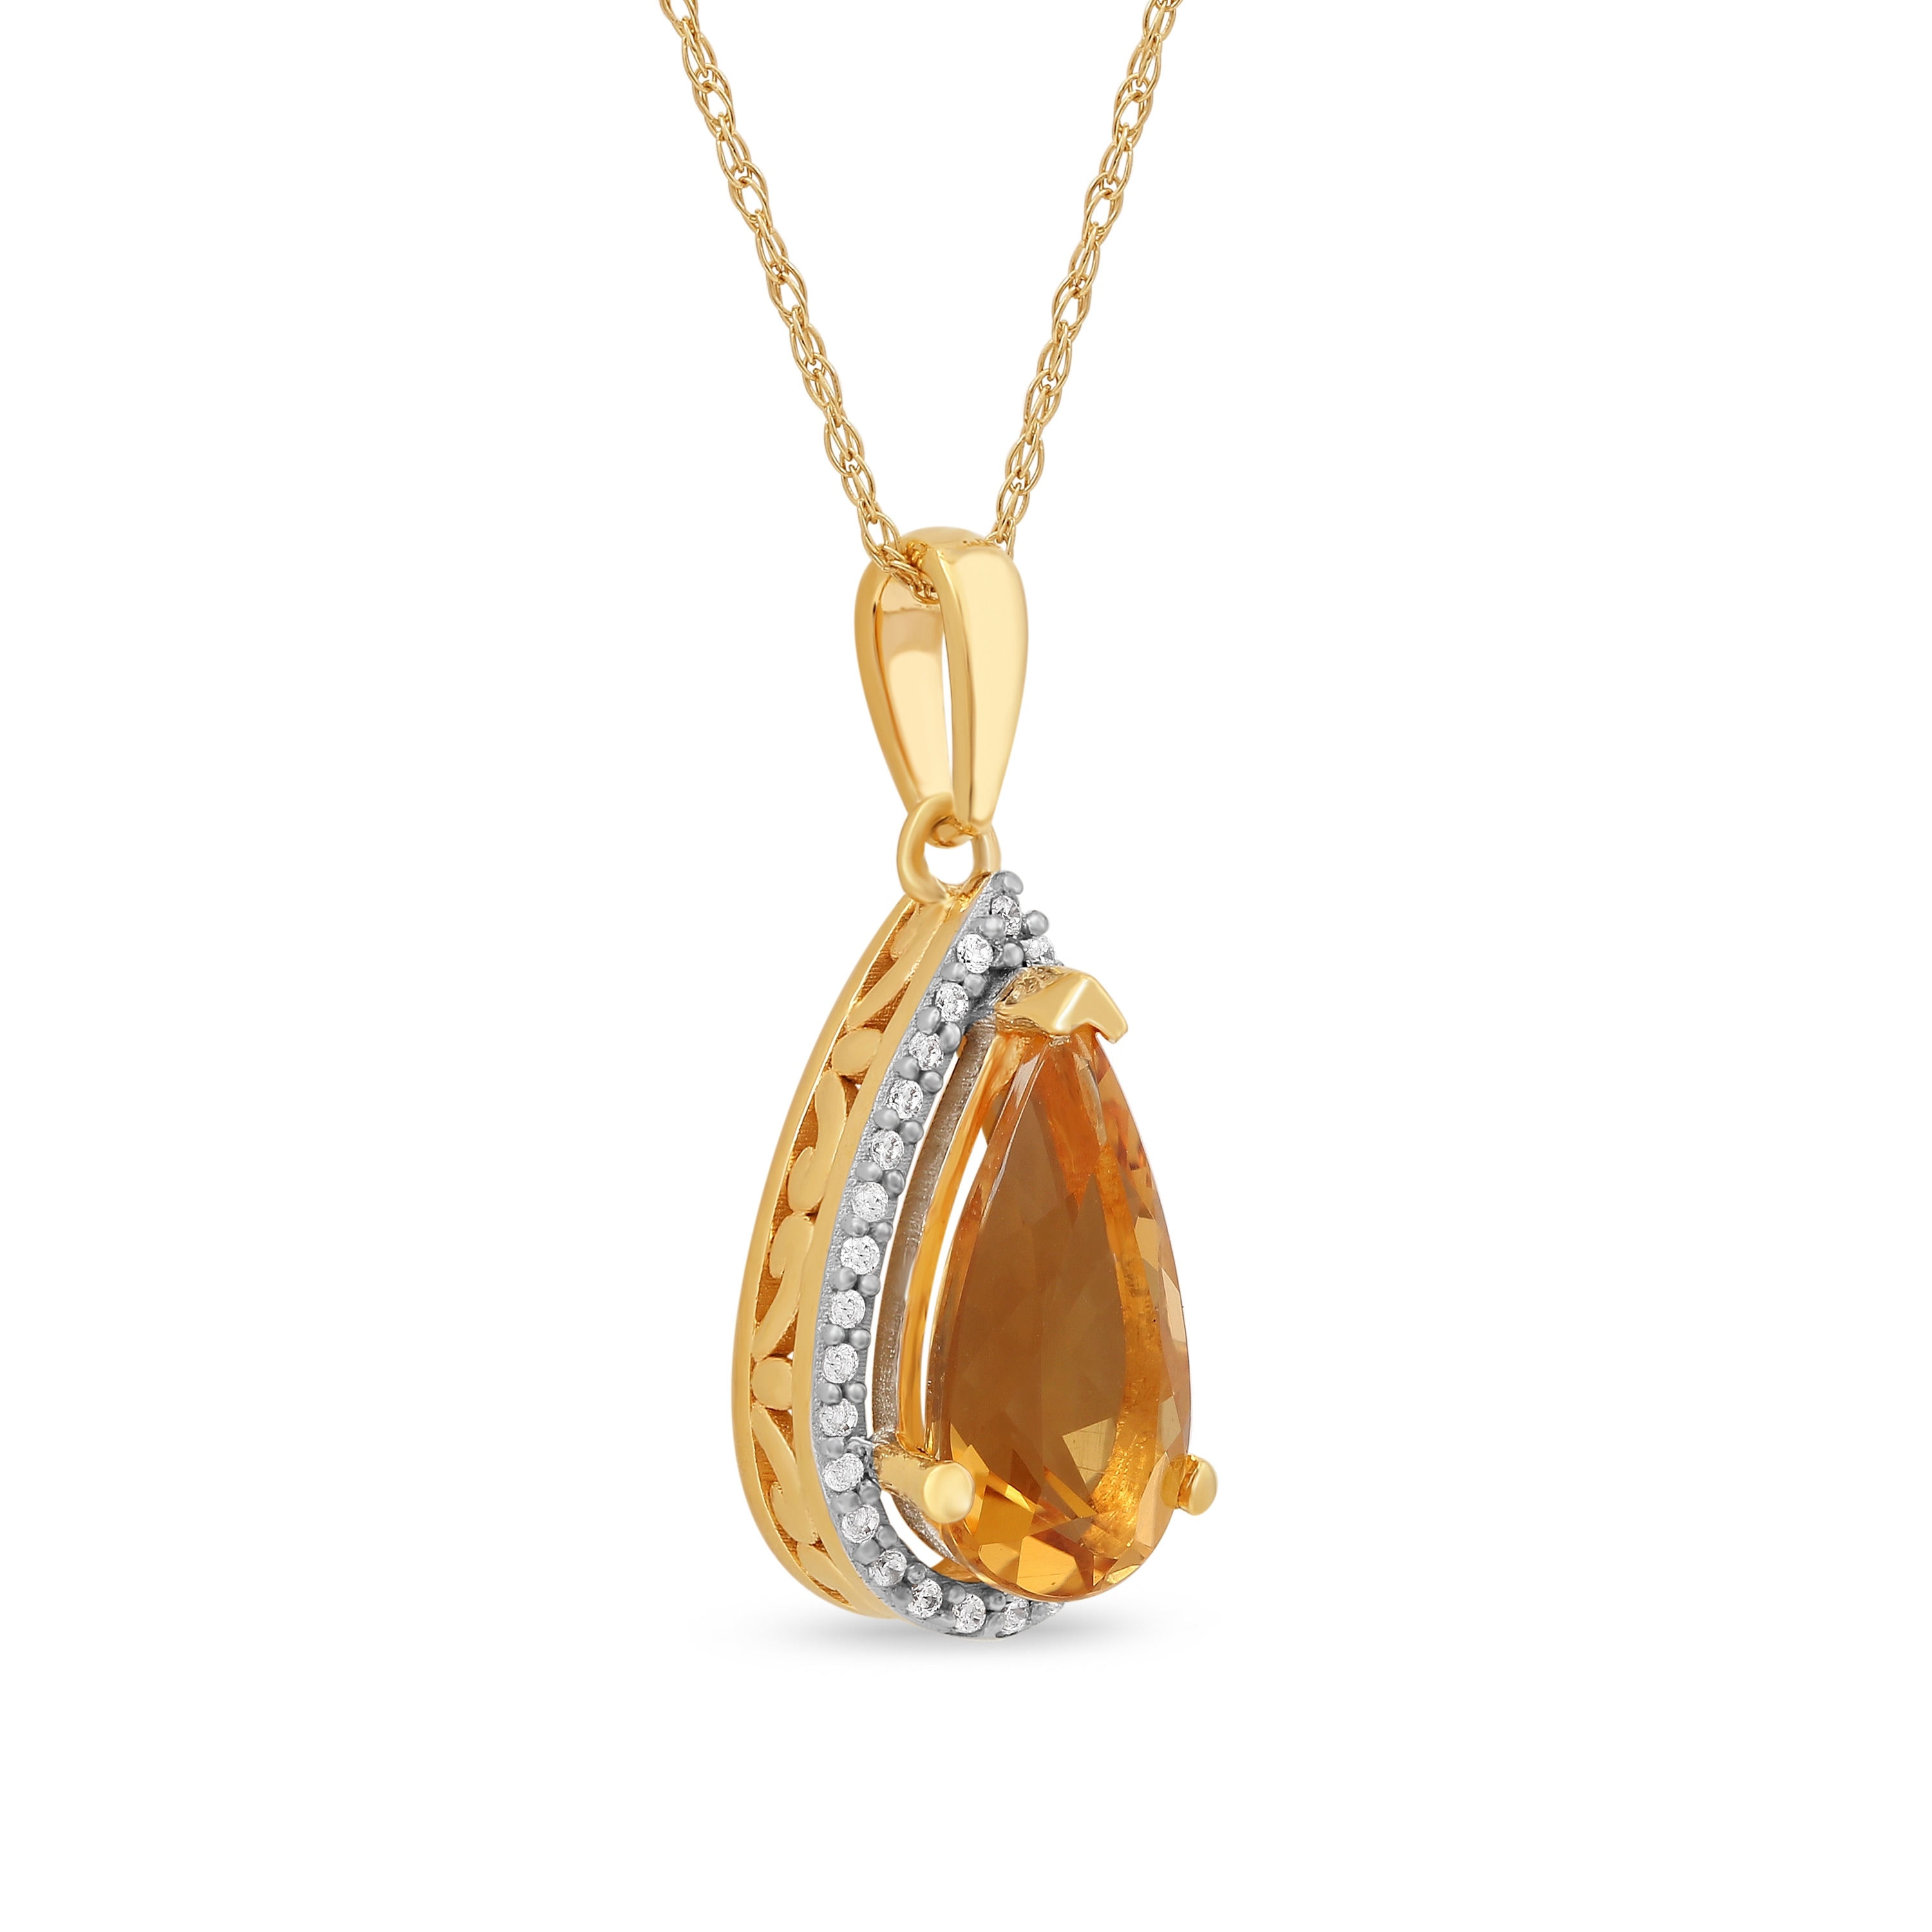 Details about   1.52 Ct 10x7mm Gemstone & Real Diamond 10K Yellow Gold Halo Pendant Necklace